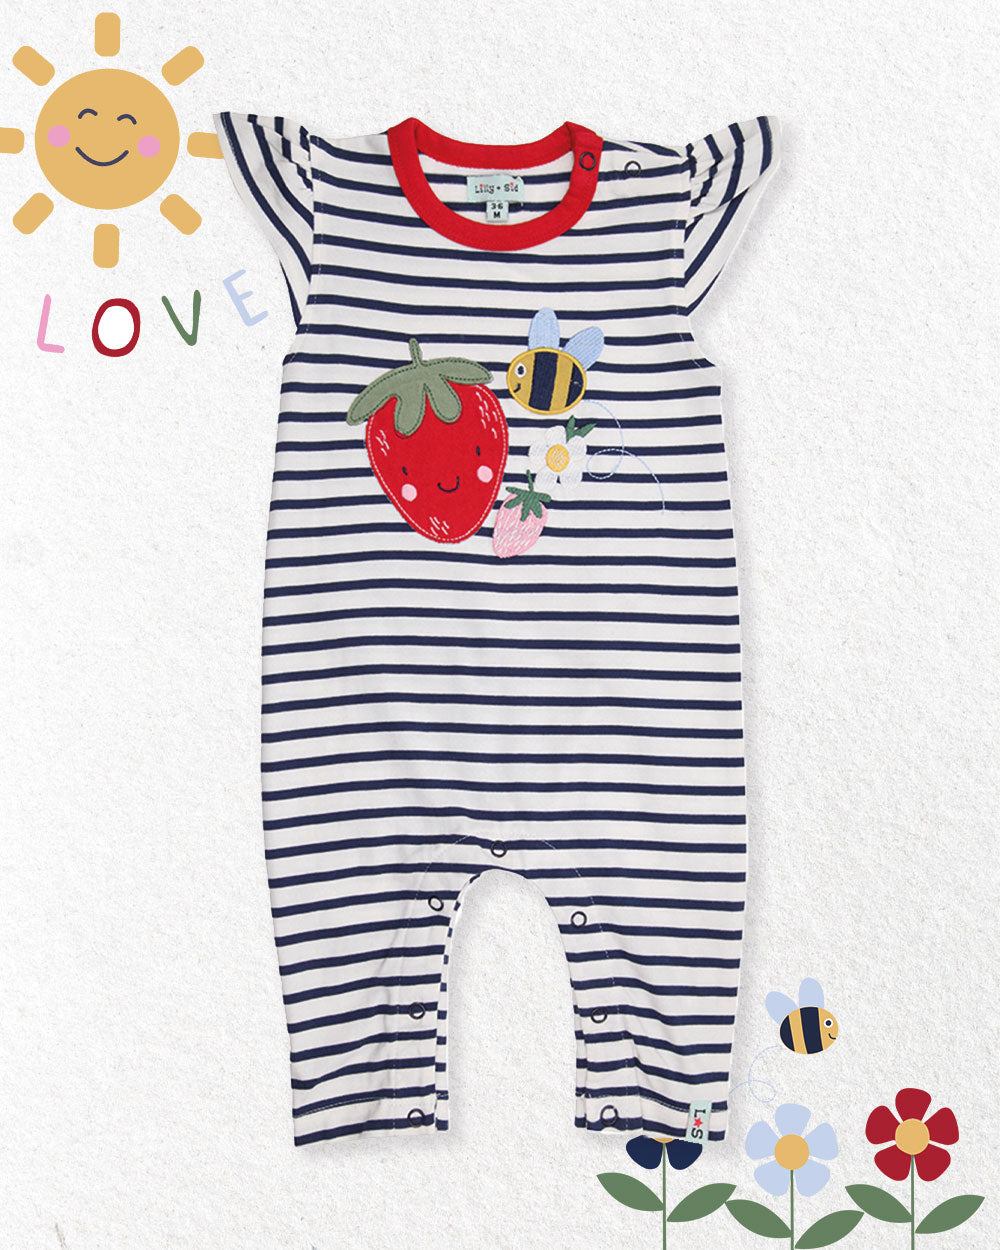 Busy Bee Applique Playsuit